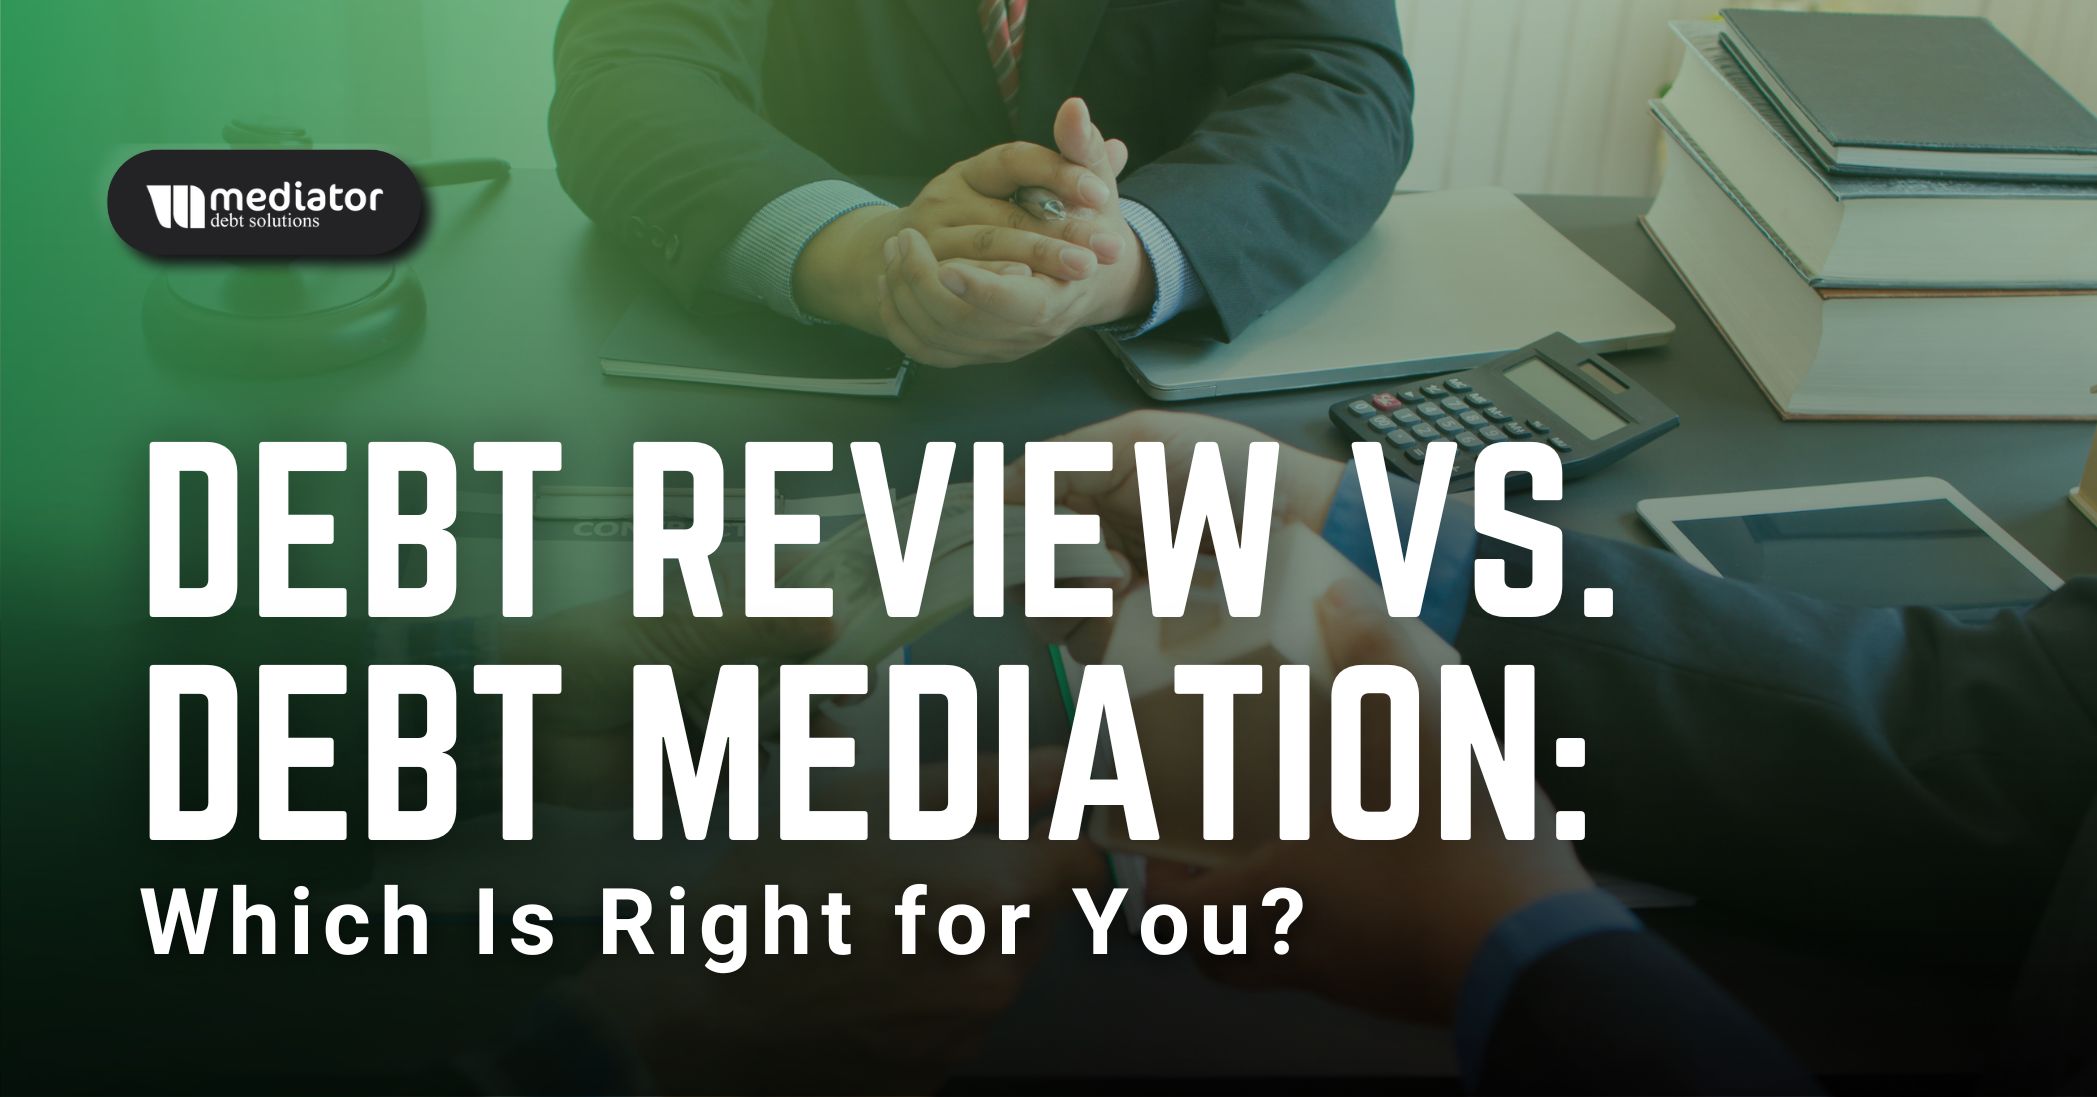 Debt Review vs. Debt Mediation: Which Is Right for You?